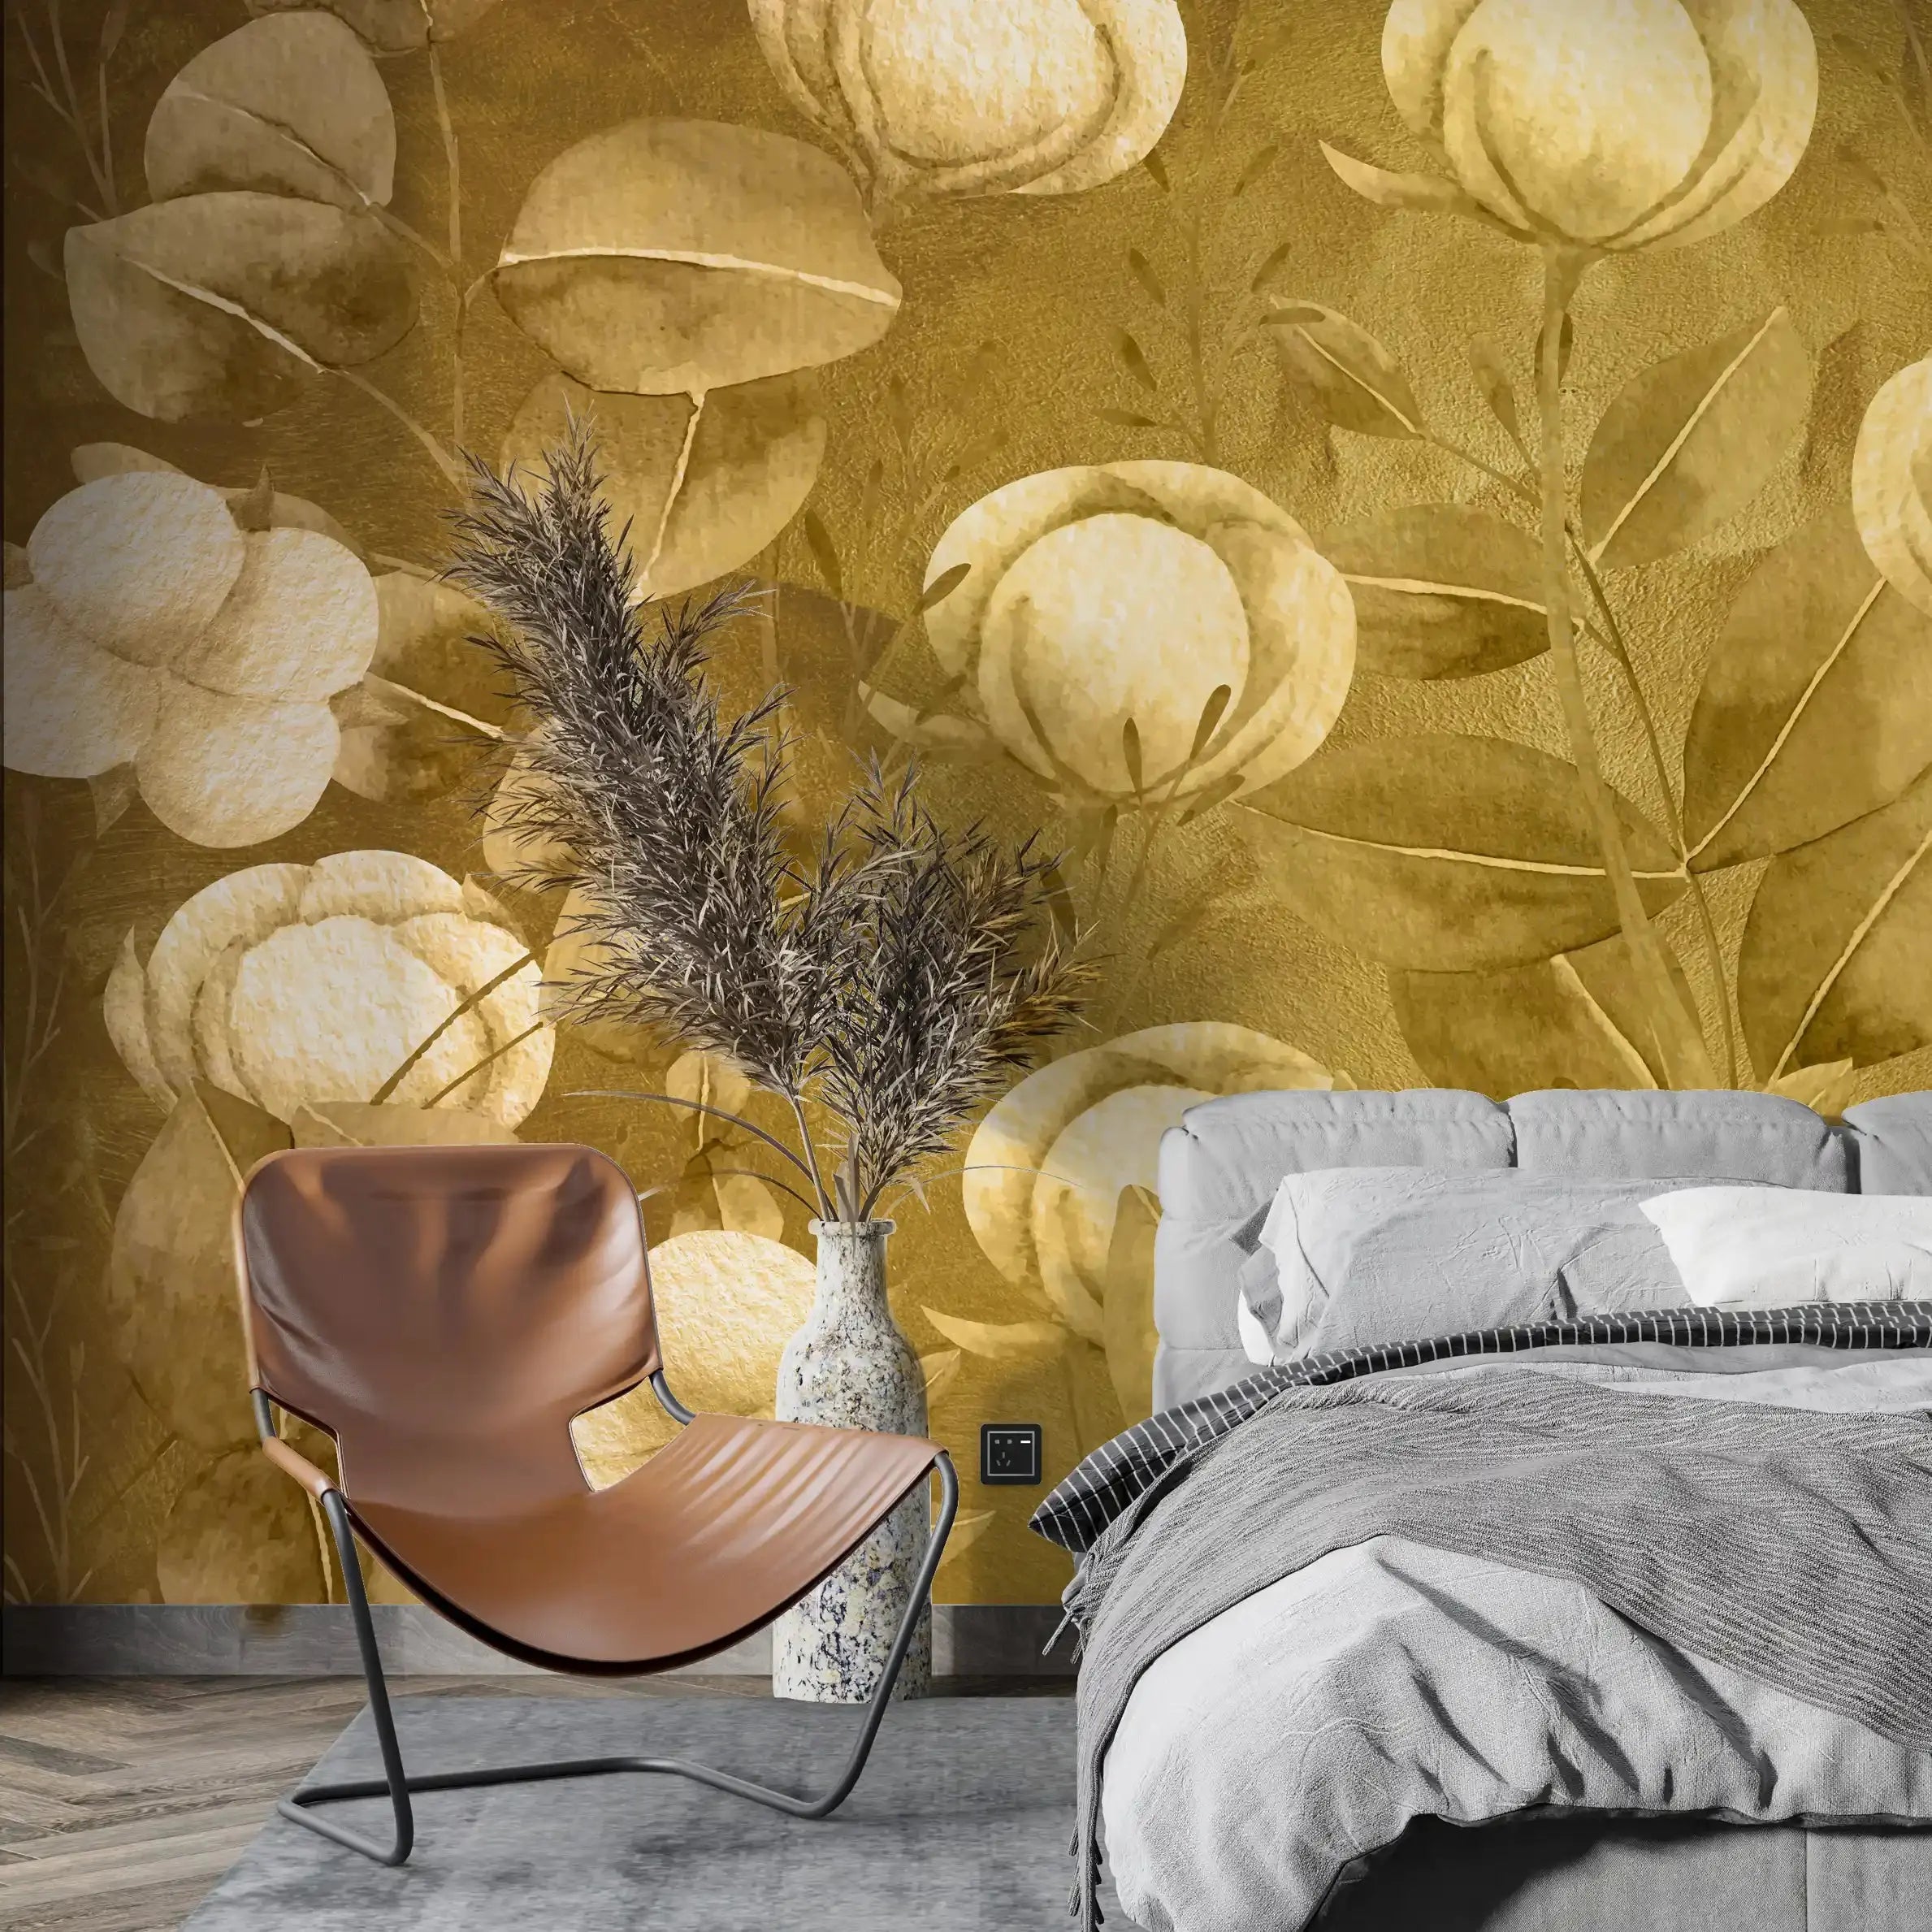 3035-A / Floral Wall Decor: Peelable, Stickable Wallpaper with Tulips Design on Gold Background, Ideal for Room Decor - Artevella